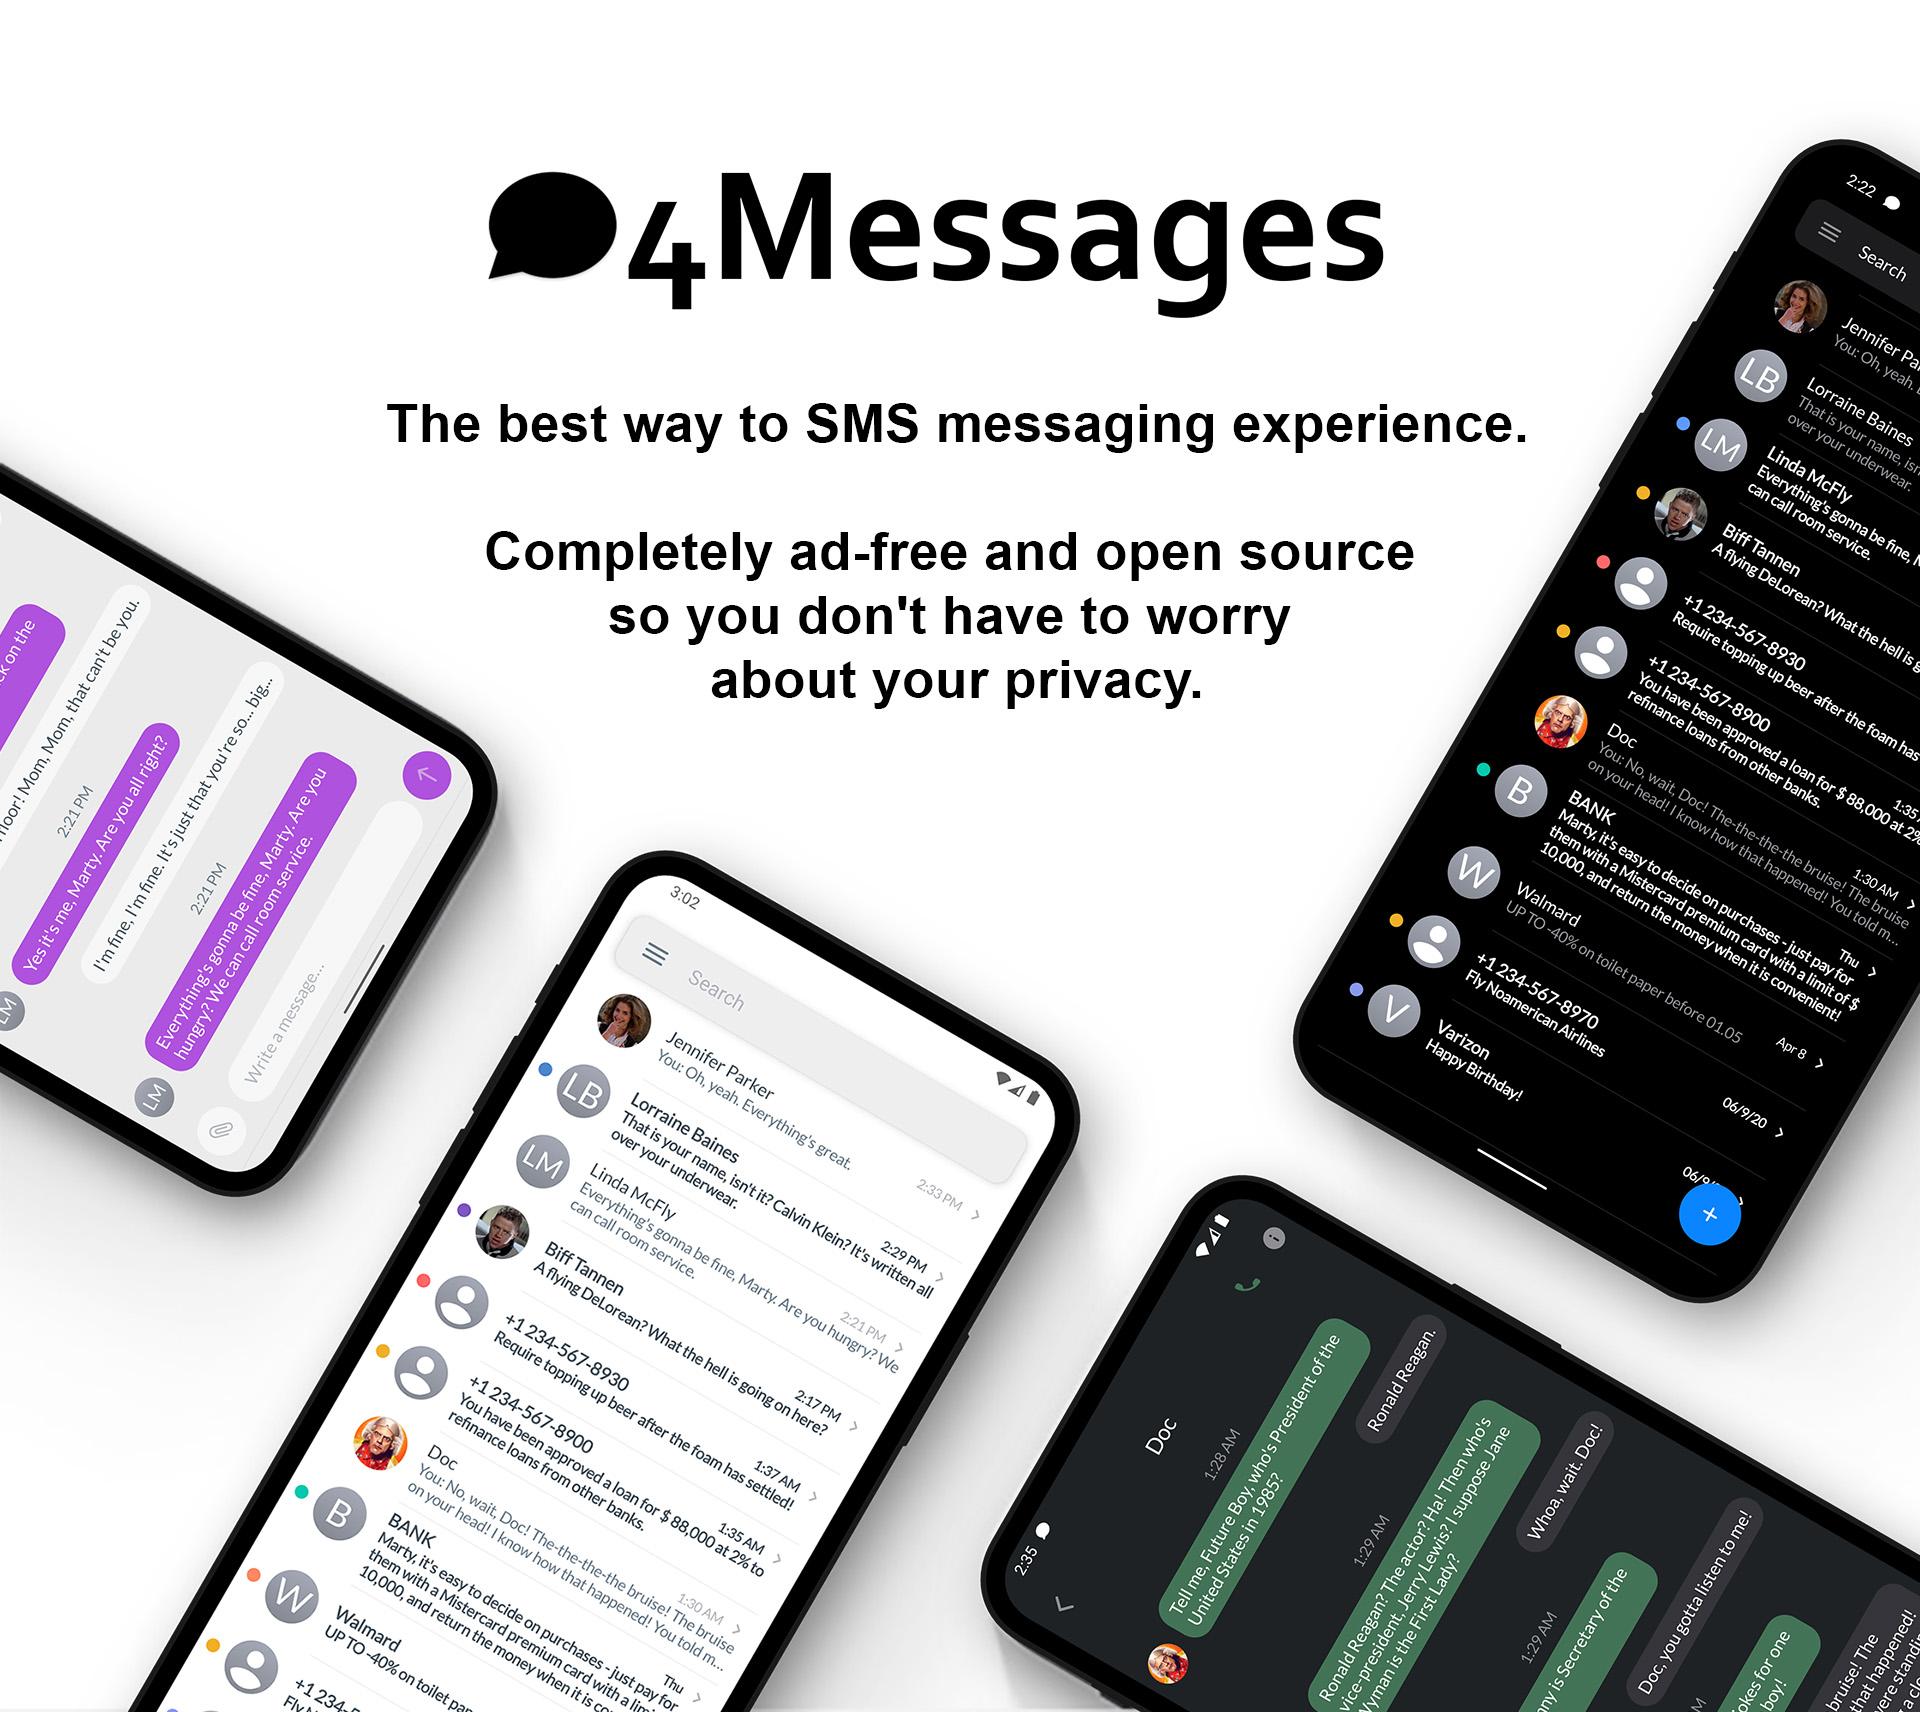 0 4 messages. SMS message Dictionary.